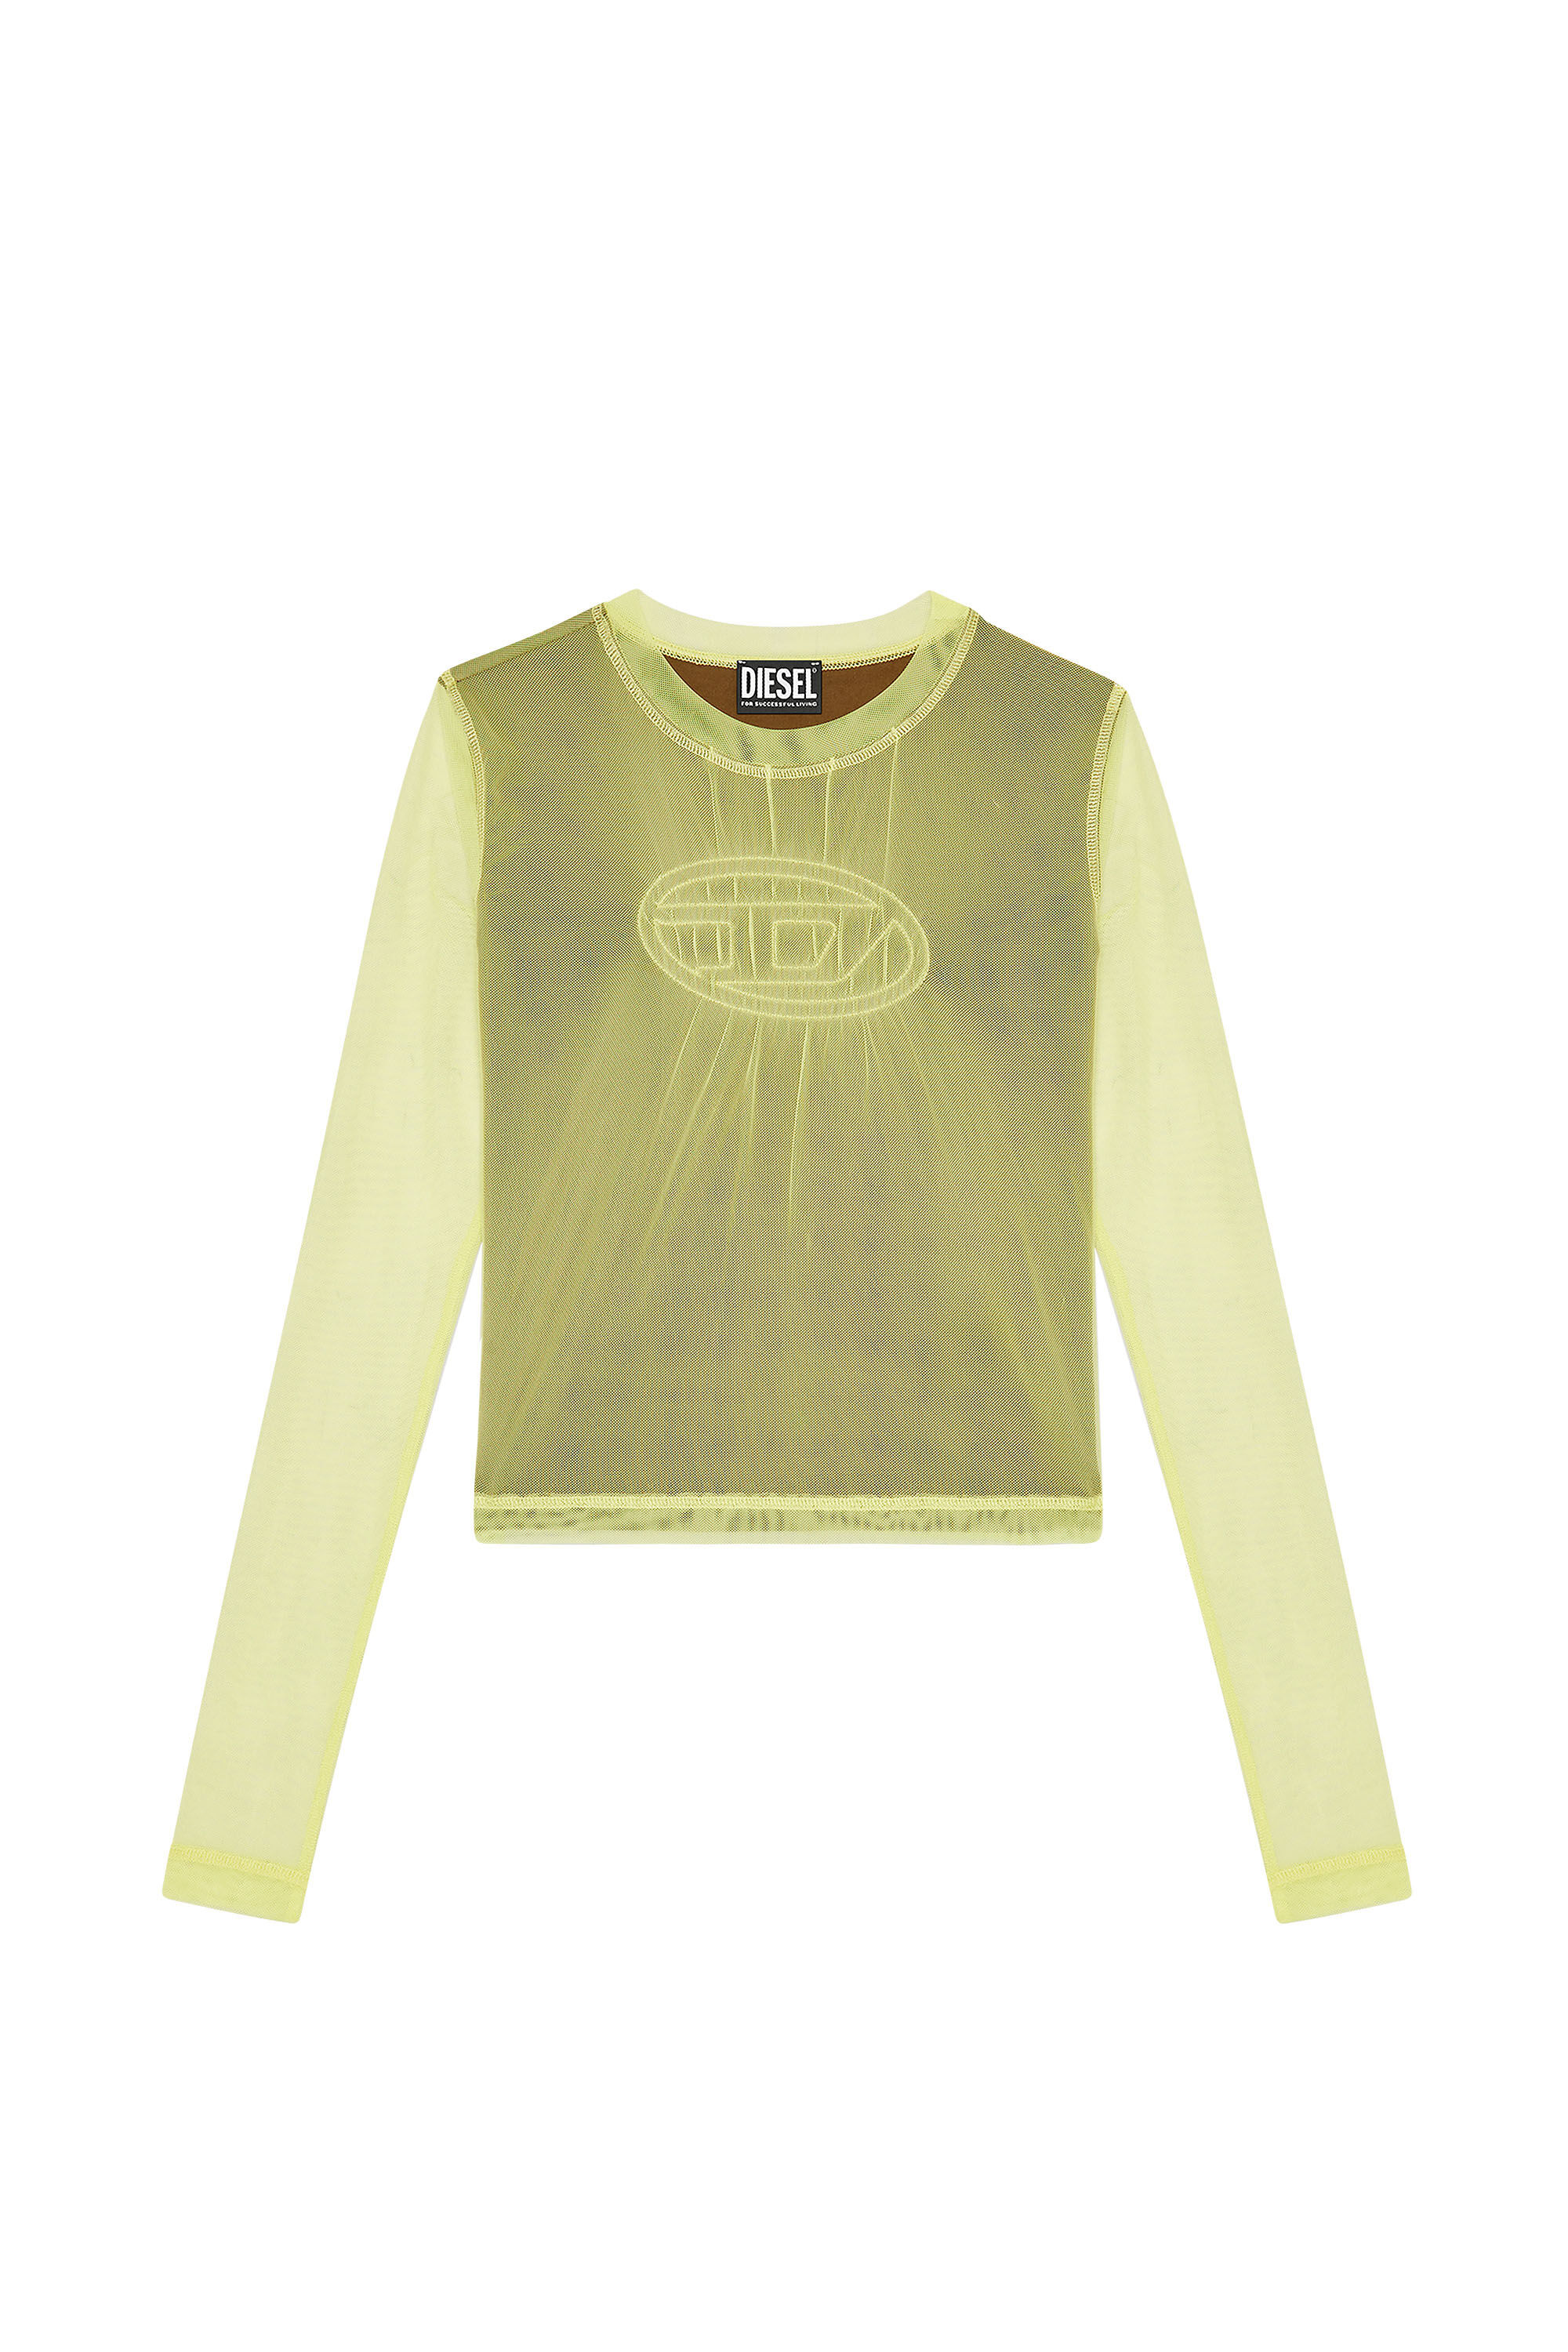 T-RYFLE Woman: Long-sleeve top in jersey and tulle | Diesel